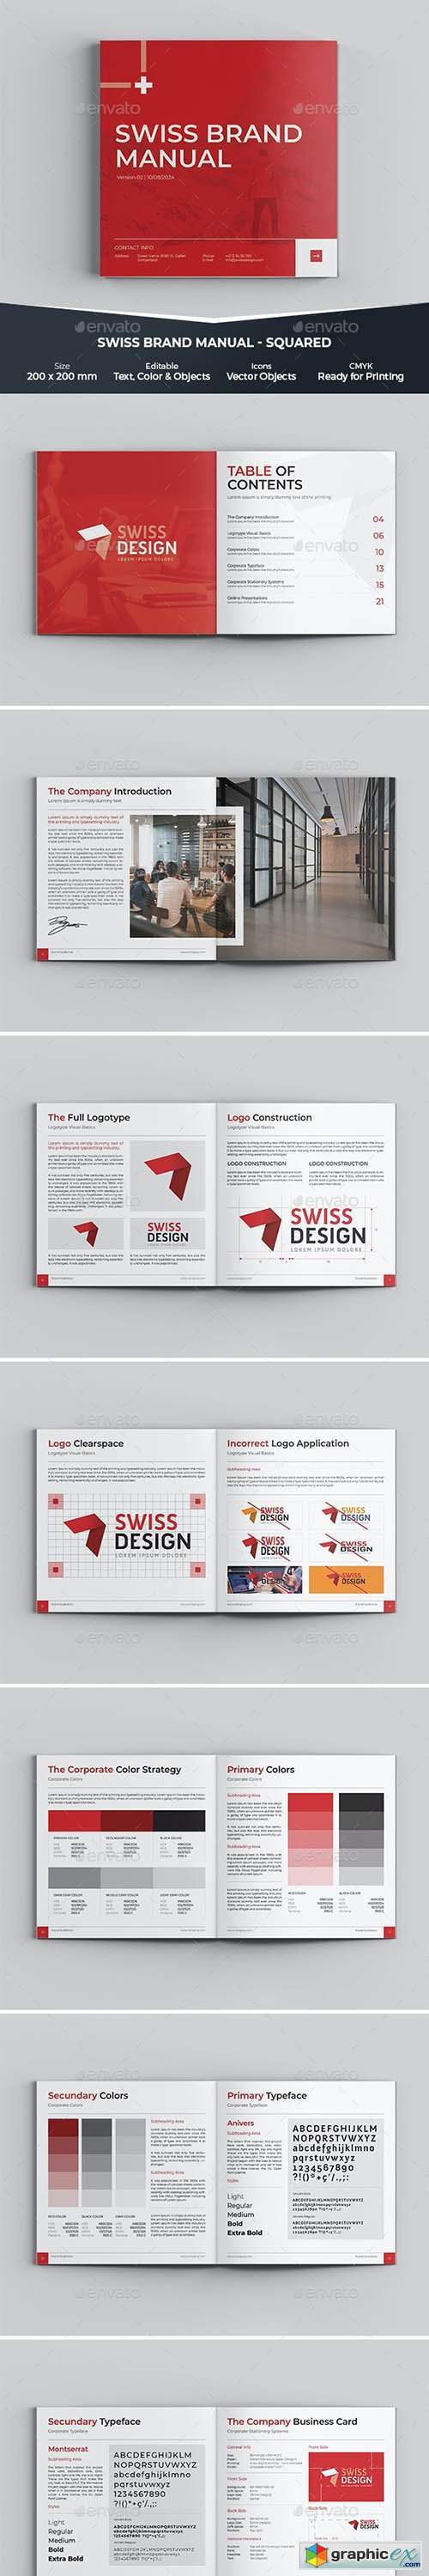 Brand Manual - Brand Guidelines - Squared